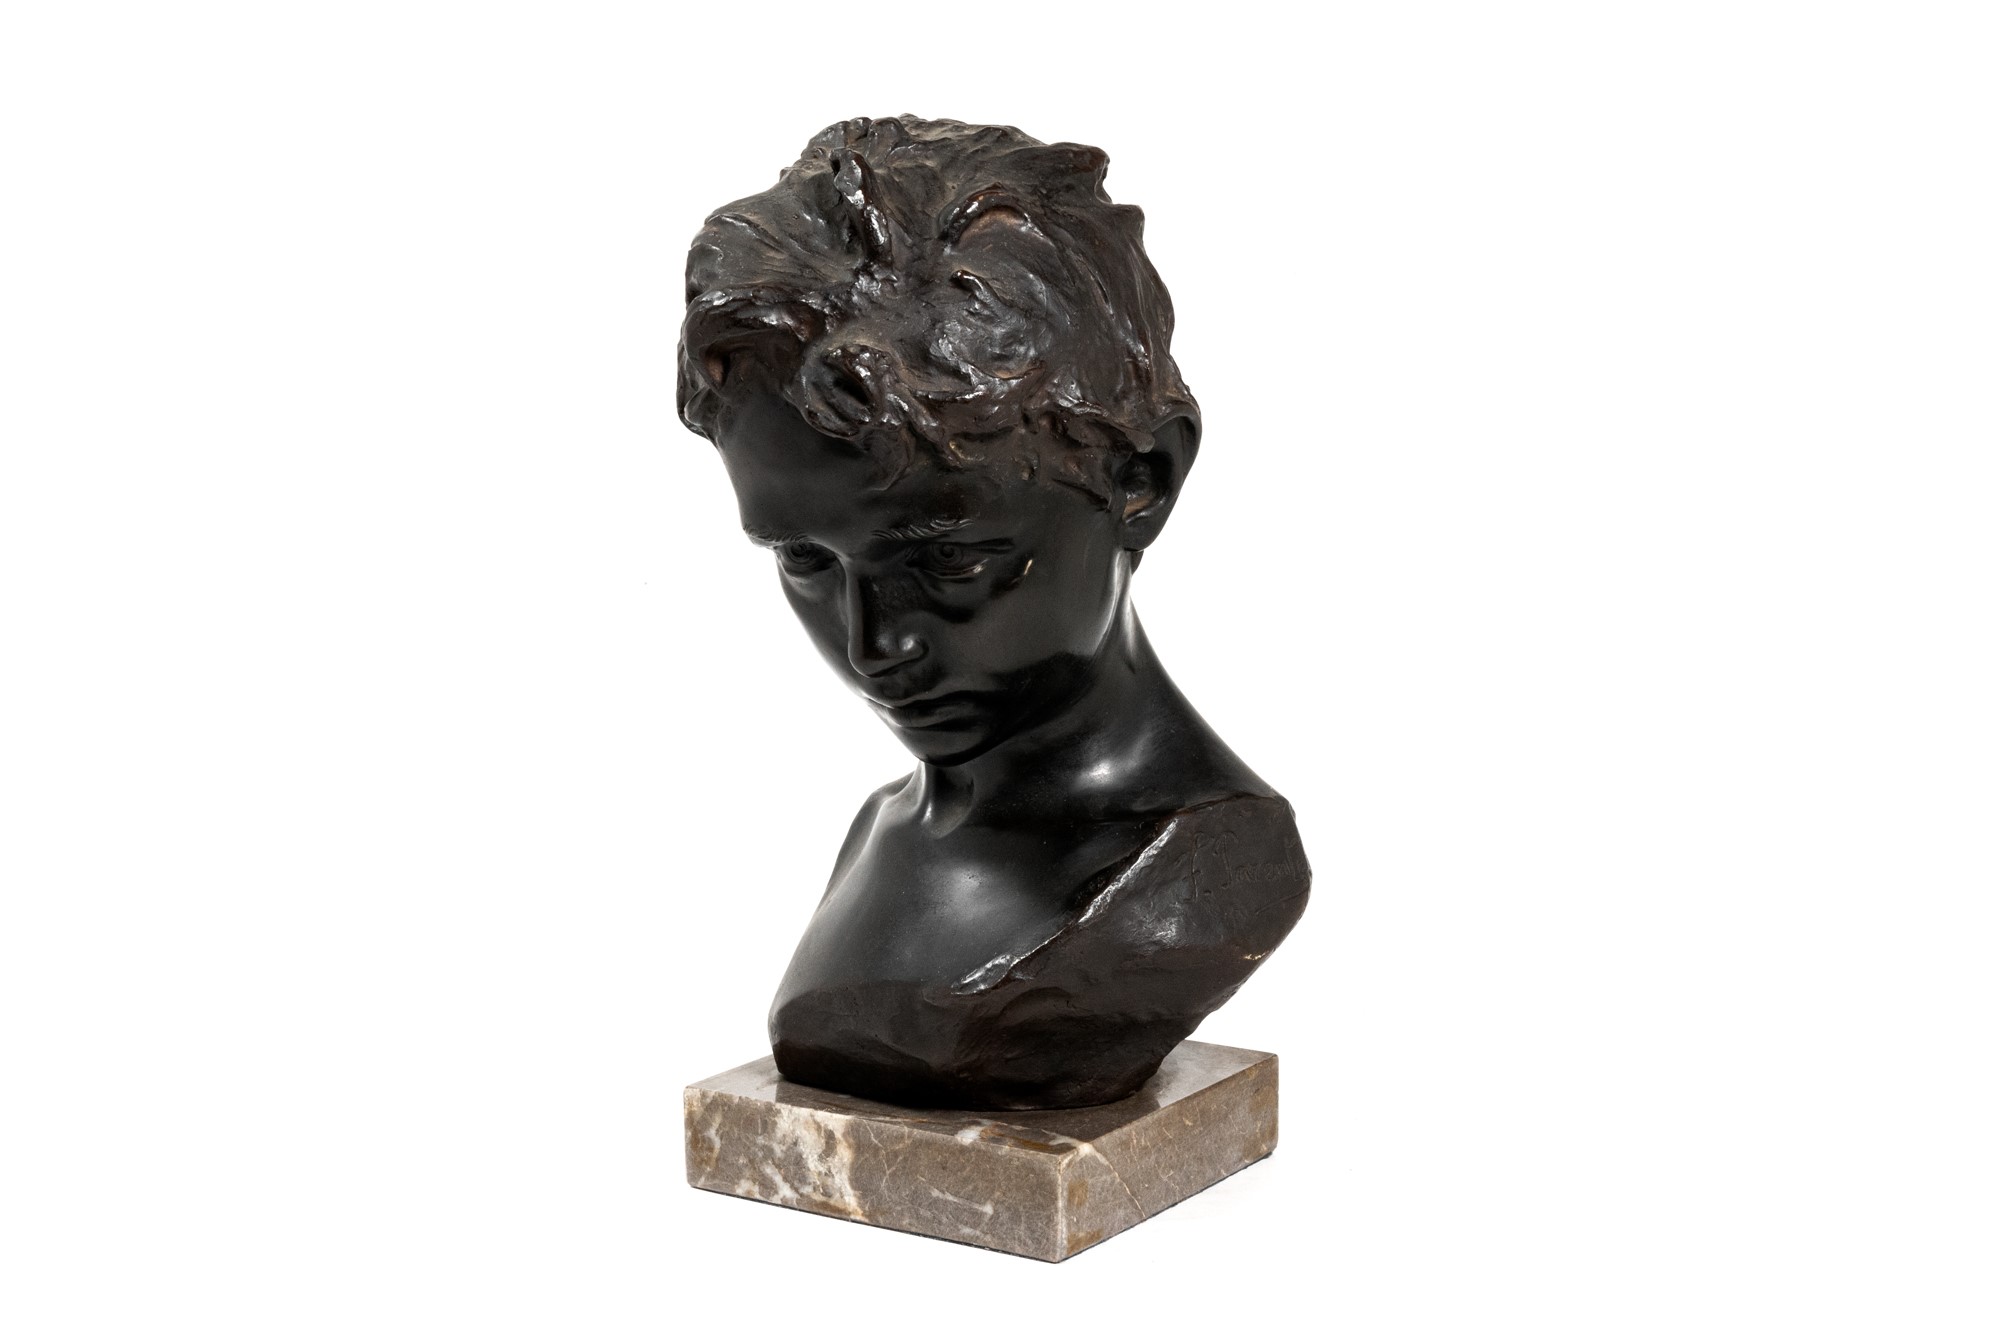 Francesco Parente (1885 - 1969) Bust of a boy in bronze, signed, based on red Levanto marble41 x